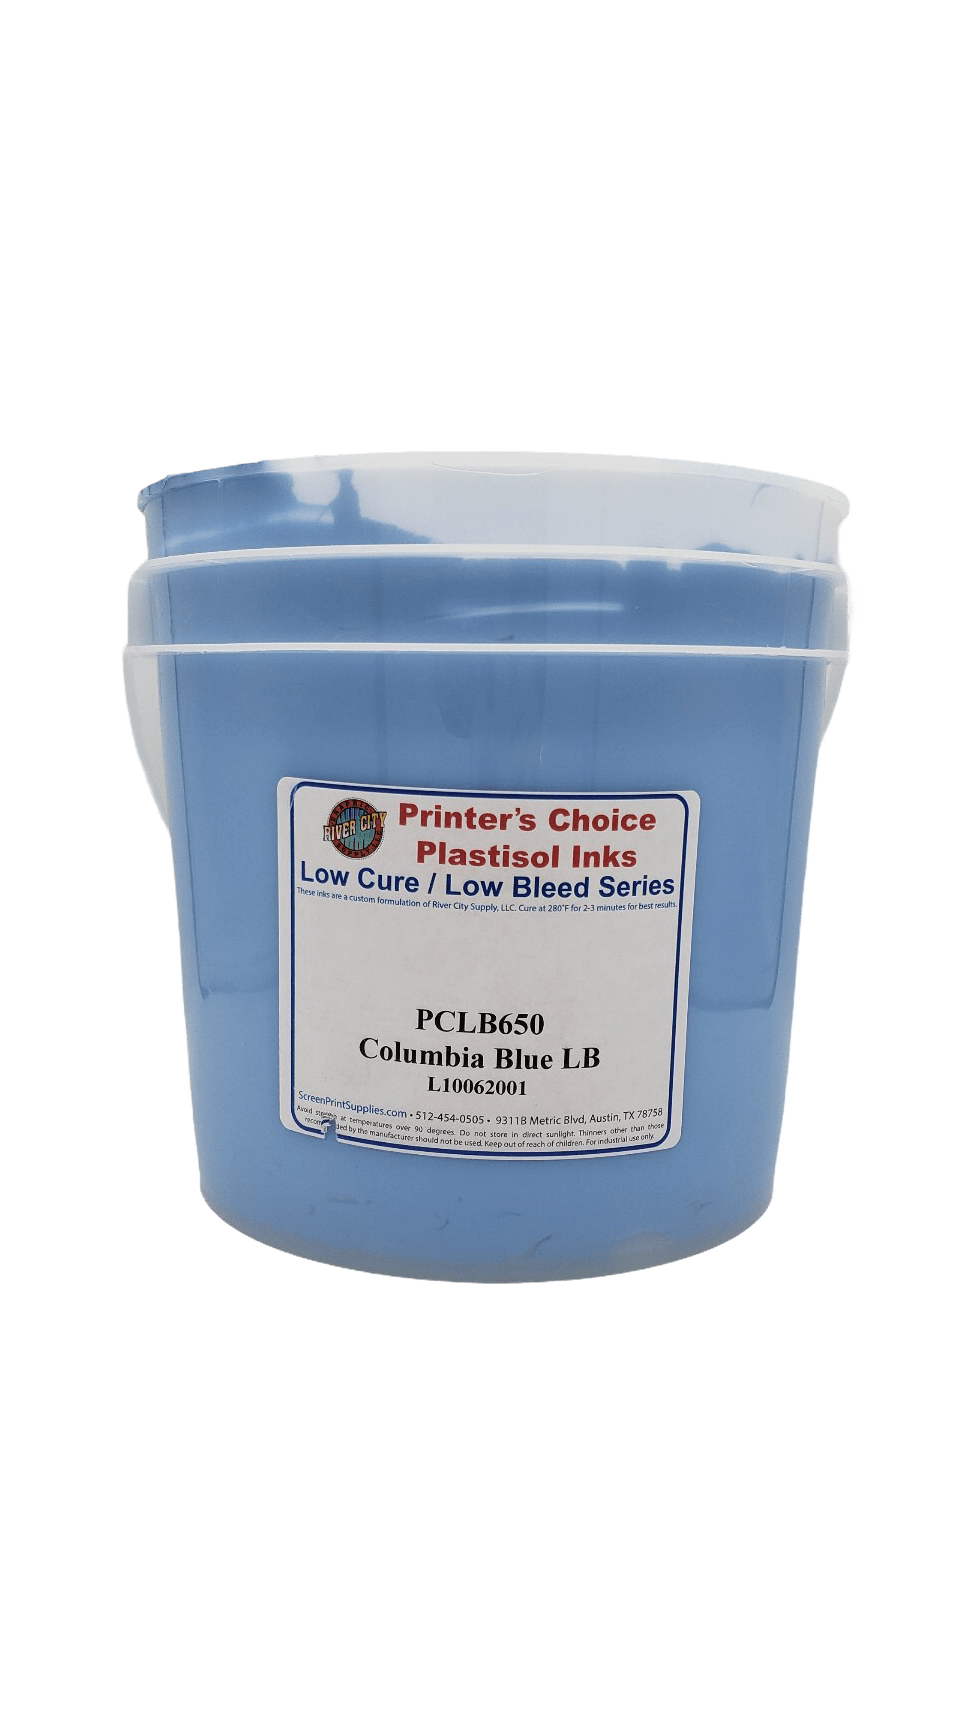 Rapid Cure Screen Printing Ink Teal - Plastisol Ink for Screen Printing Fabric - Low Temperature Curing Plastisol by Screen Print Direct - Fast Cure